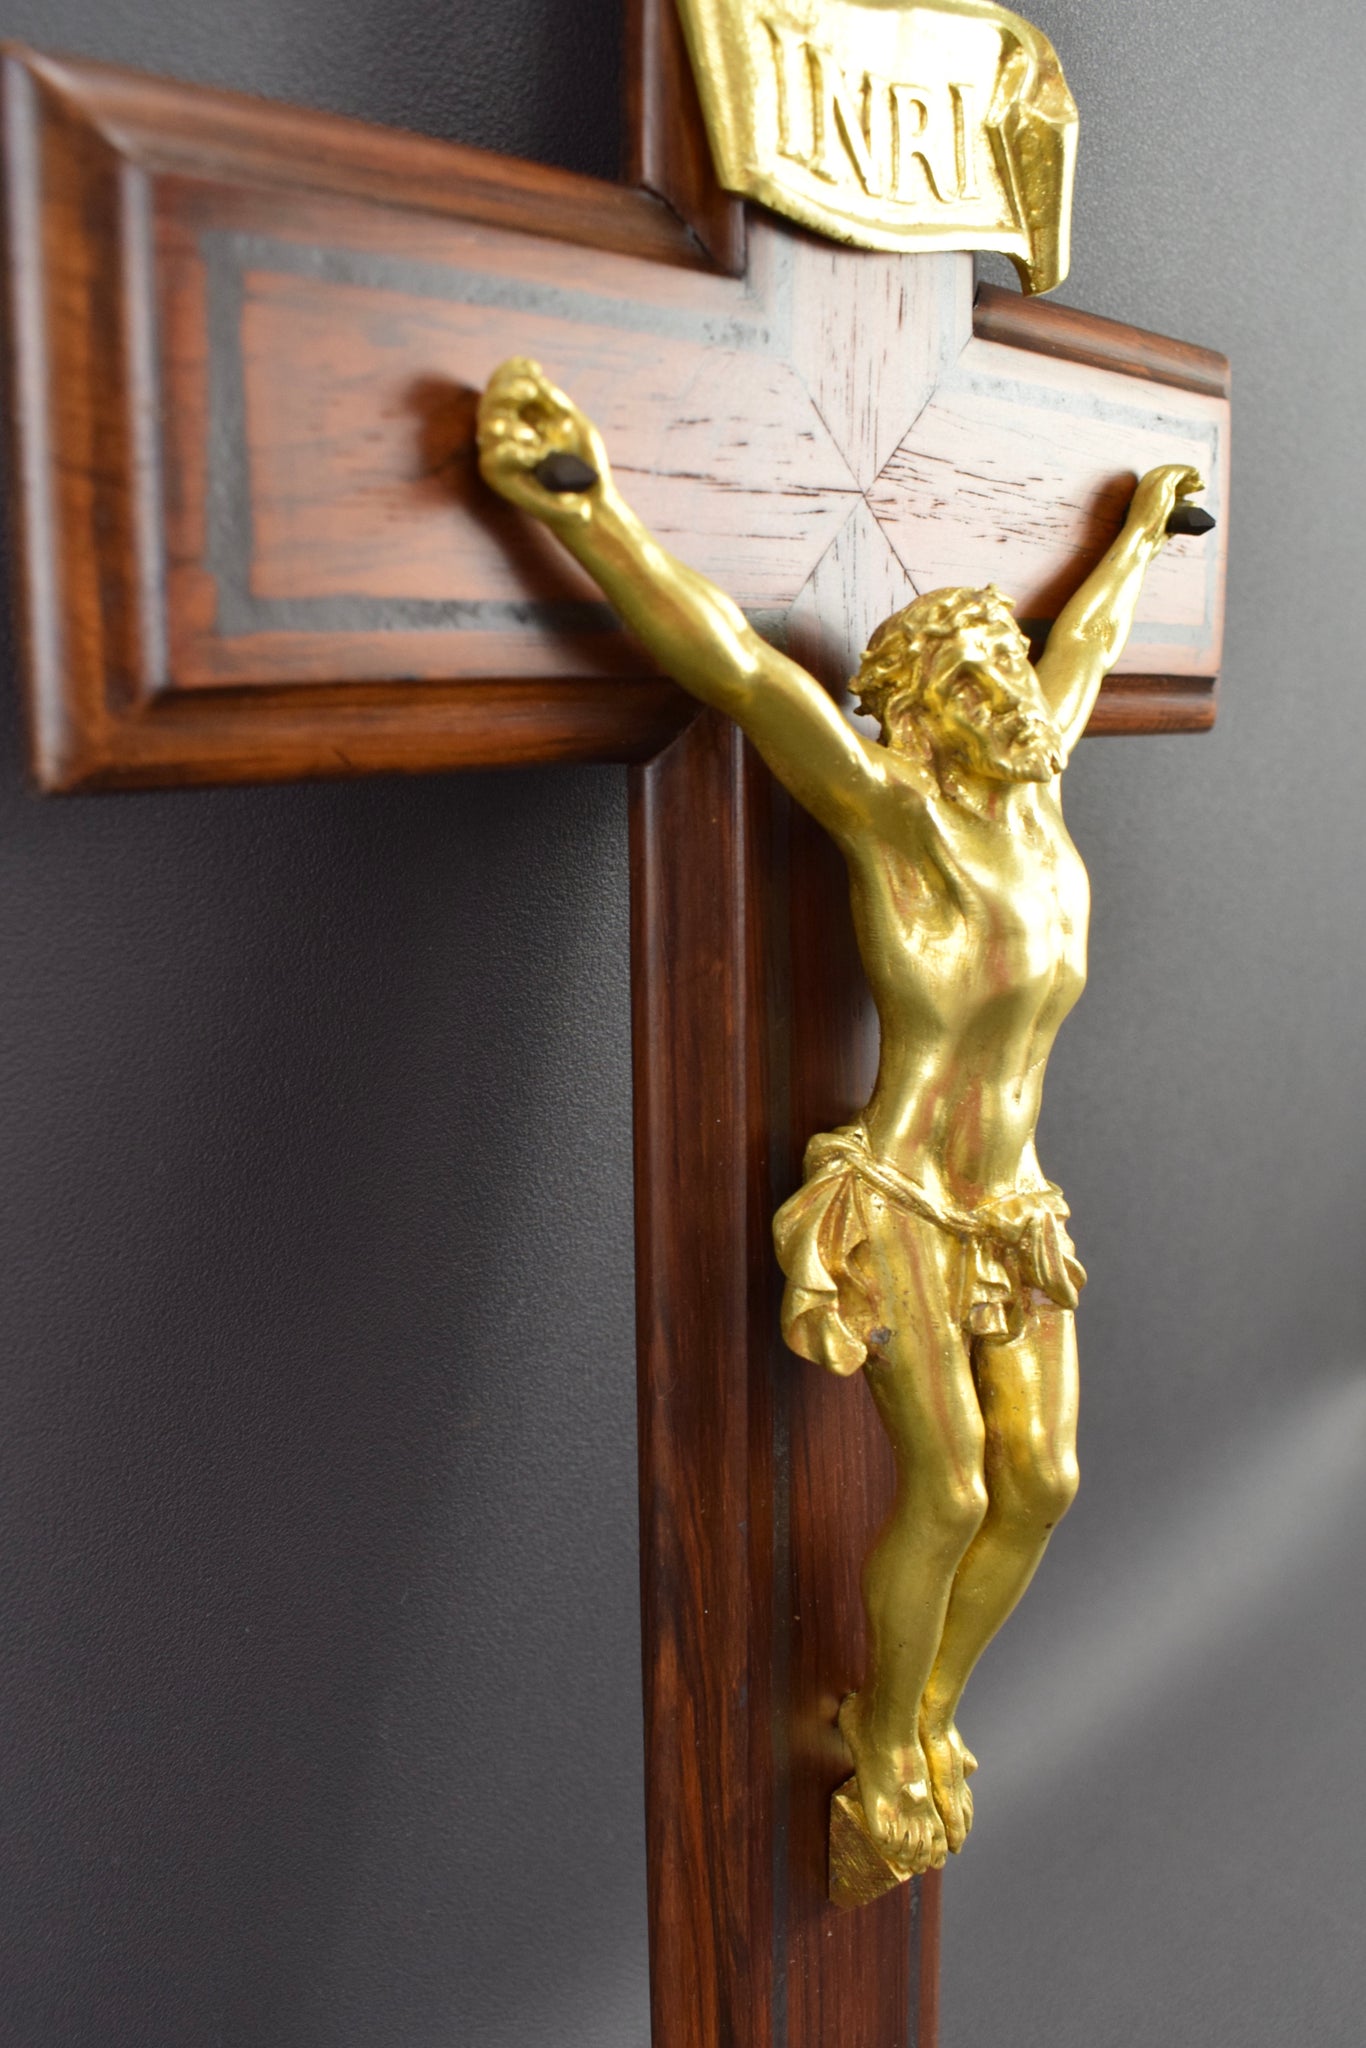 French Art Deco Large Bronze and Wood Wall Cross Crucifix